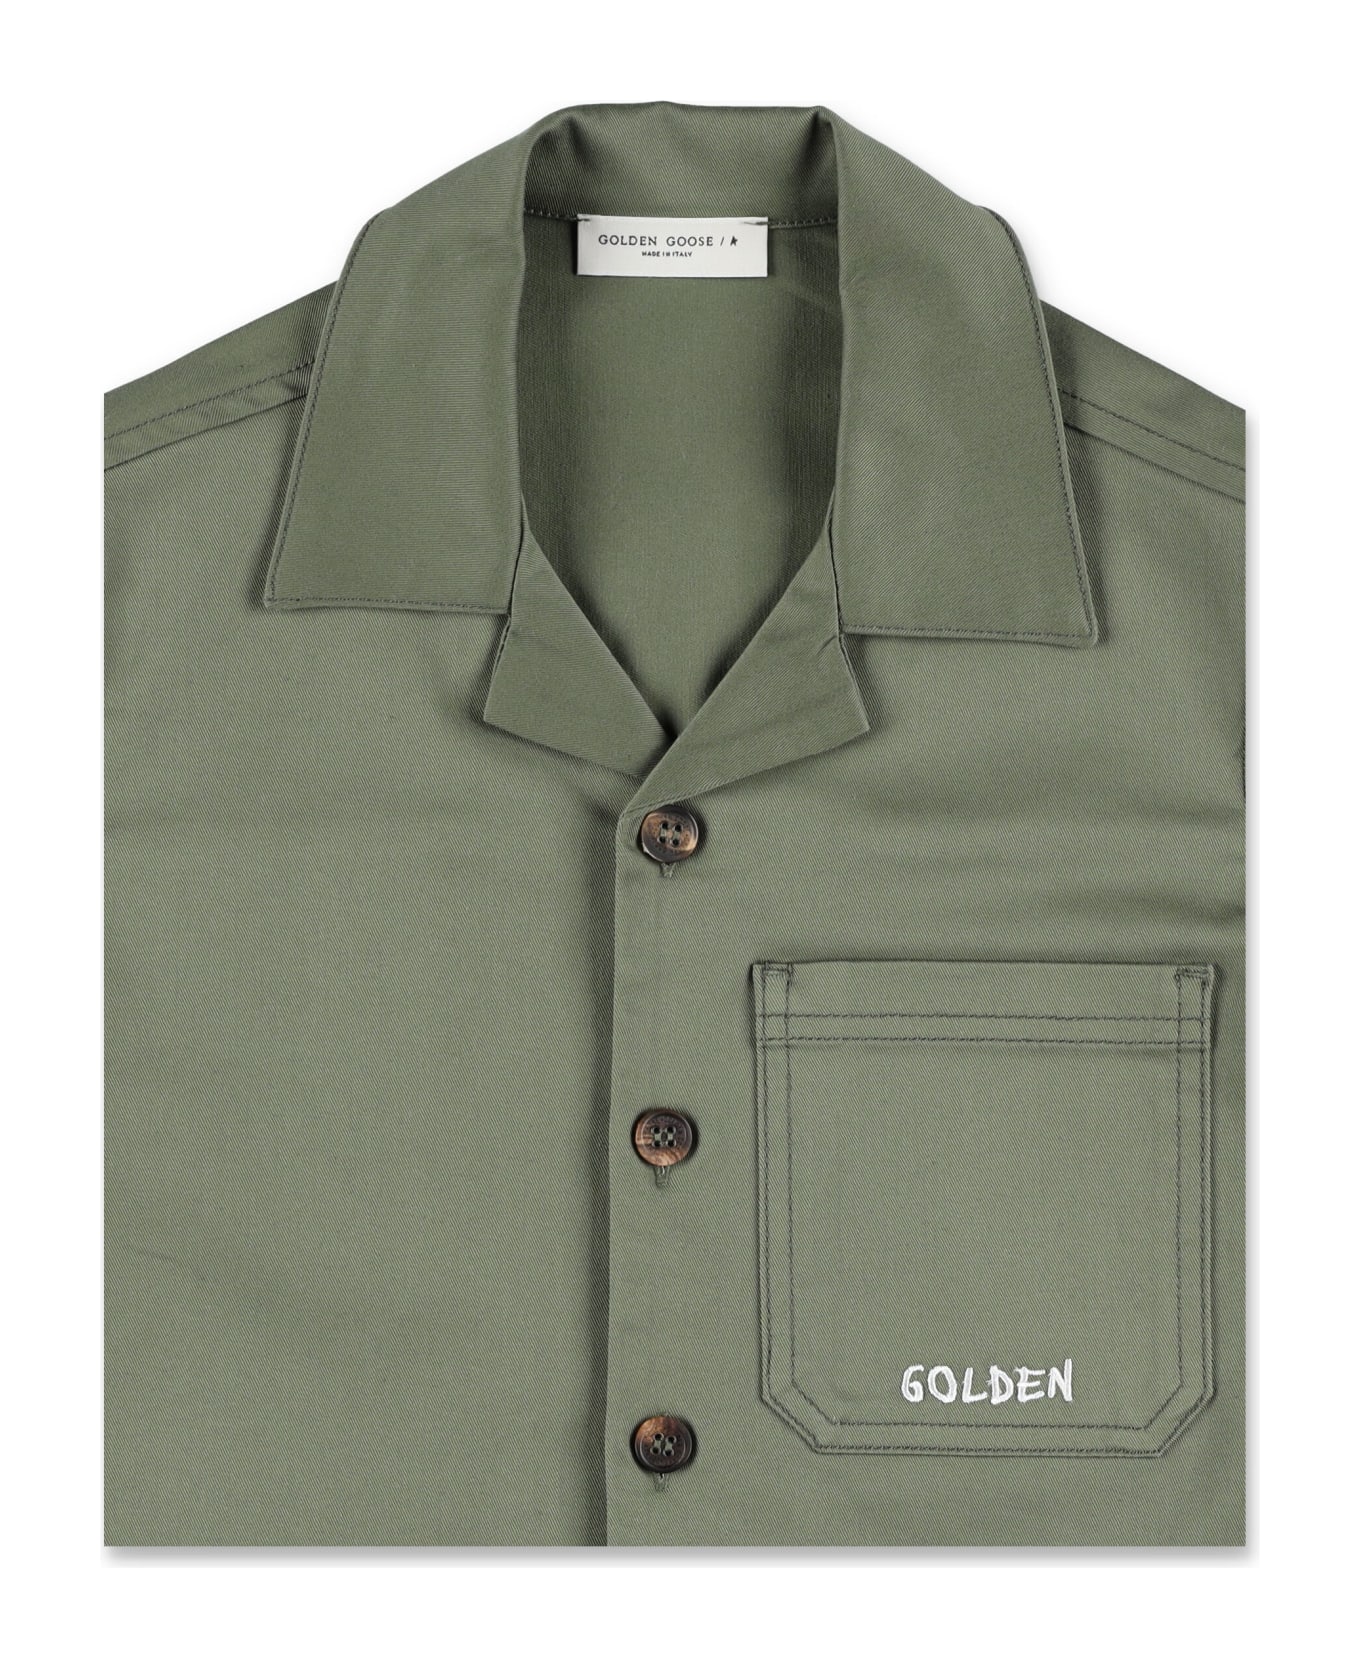 Golden Goose Boxy Fit Shirt - IVY GREEN シャツ